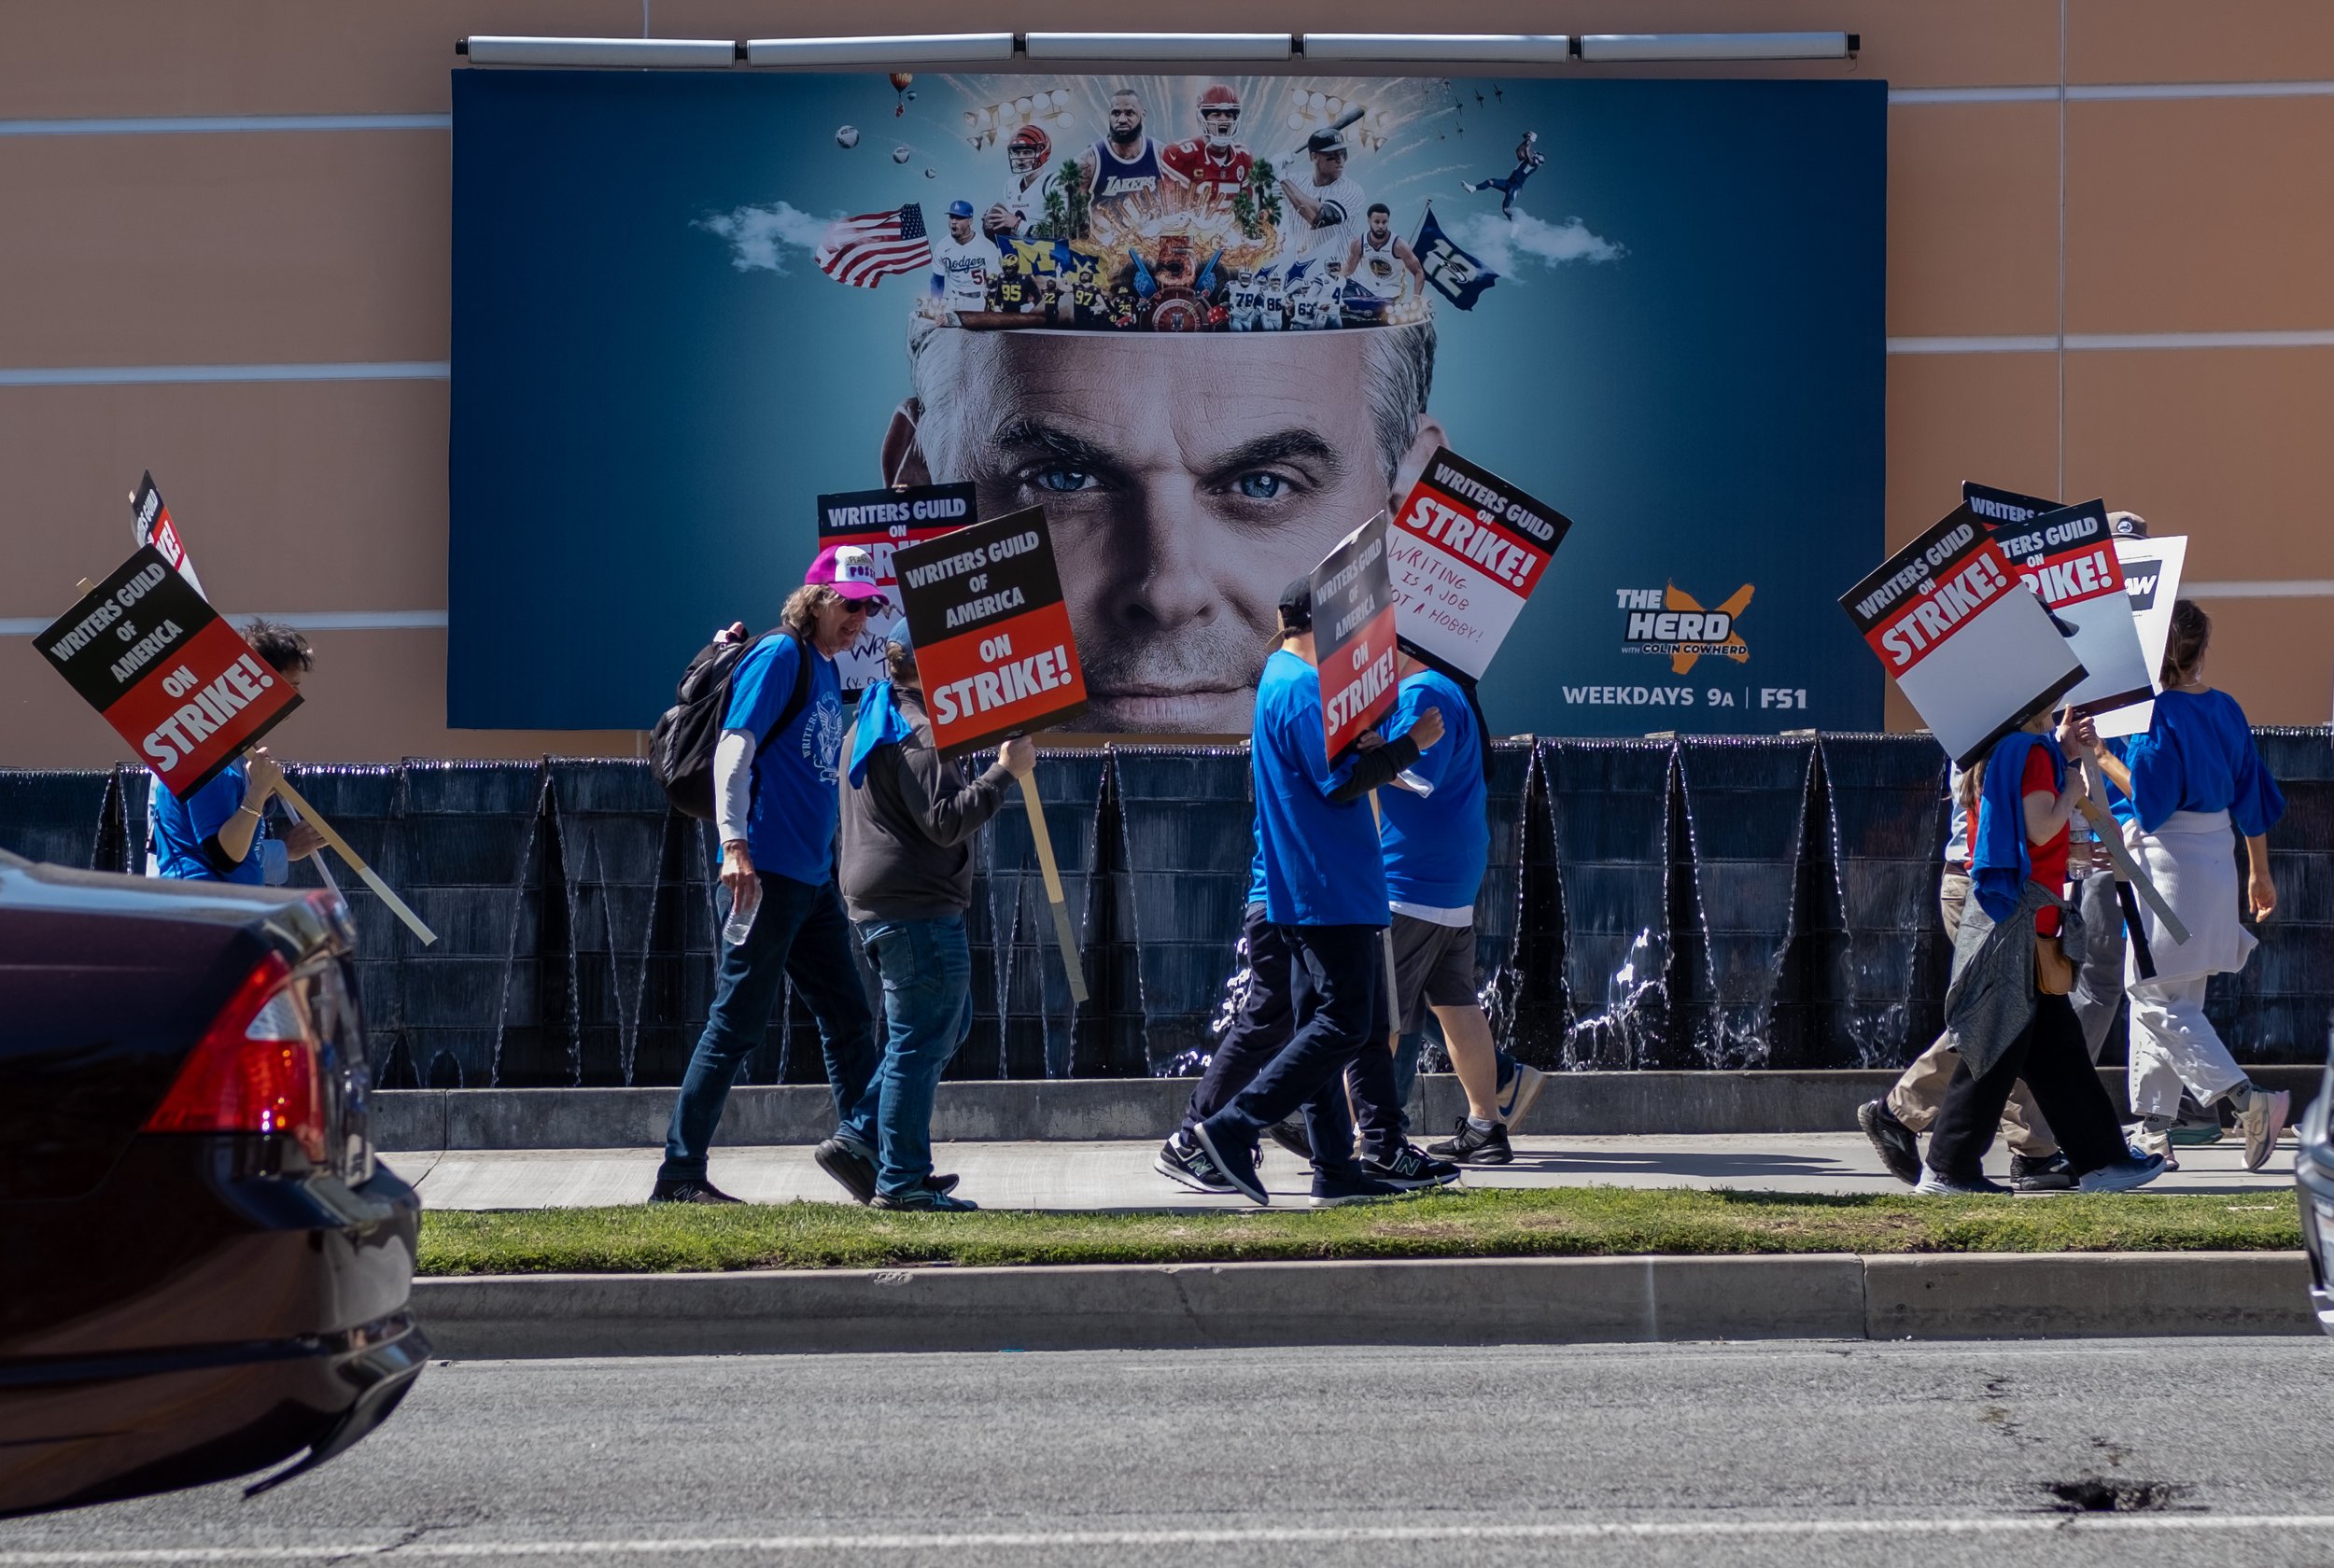  May 2nd, 2023 marks the first time the Writers Guild of America (WGA) has gone on strike since 2007. Protesters march in front of Fox Studios on Pico Blvd in Los Angeles, Calif. holding signs and wearing blue t-shirts showing support for the WGA. (A